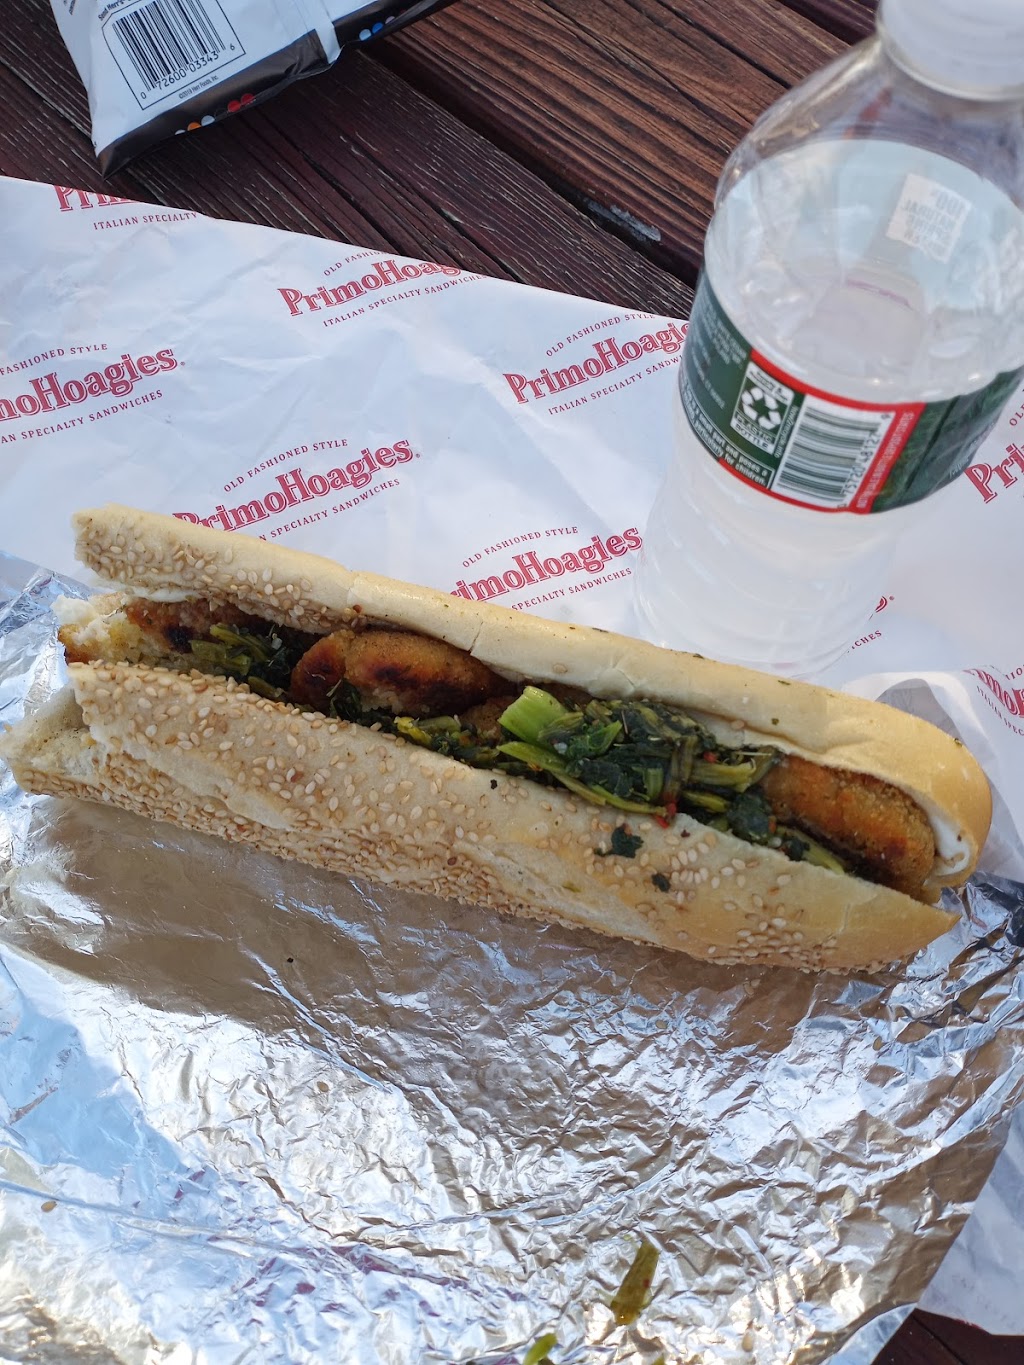 PrimoHoagies | 904 Chester Pike, Prospect Park, PA 19076 | Phone: (610) 237-7466